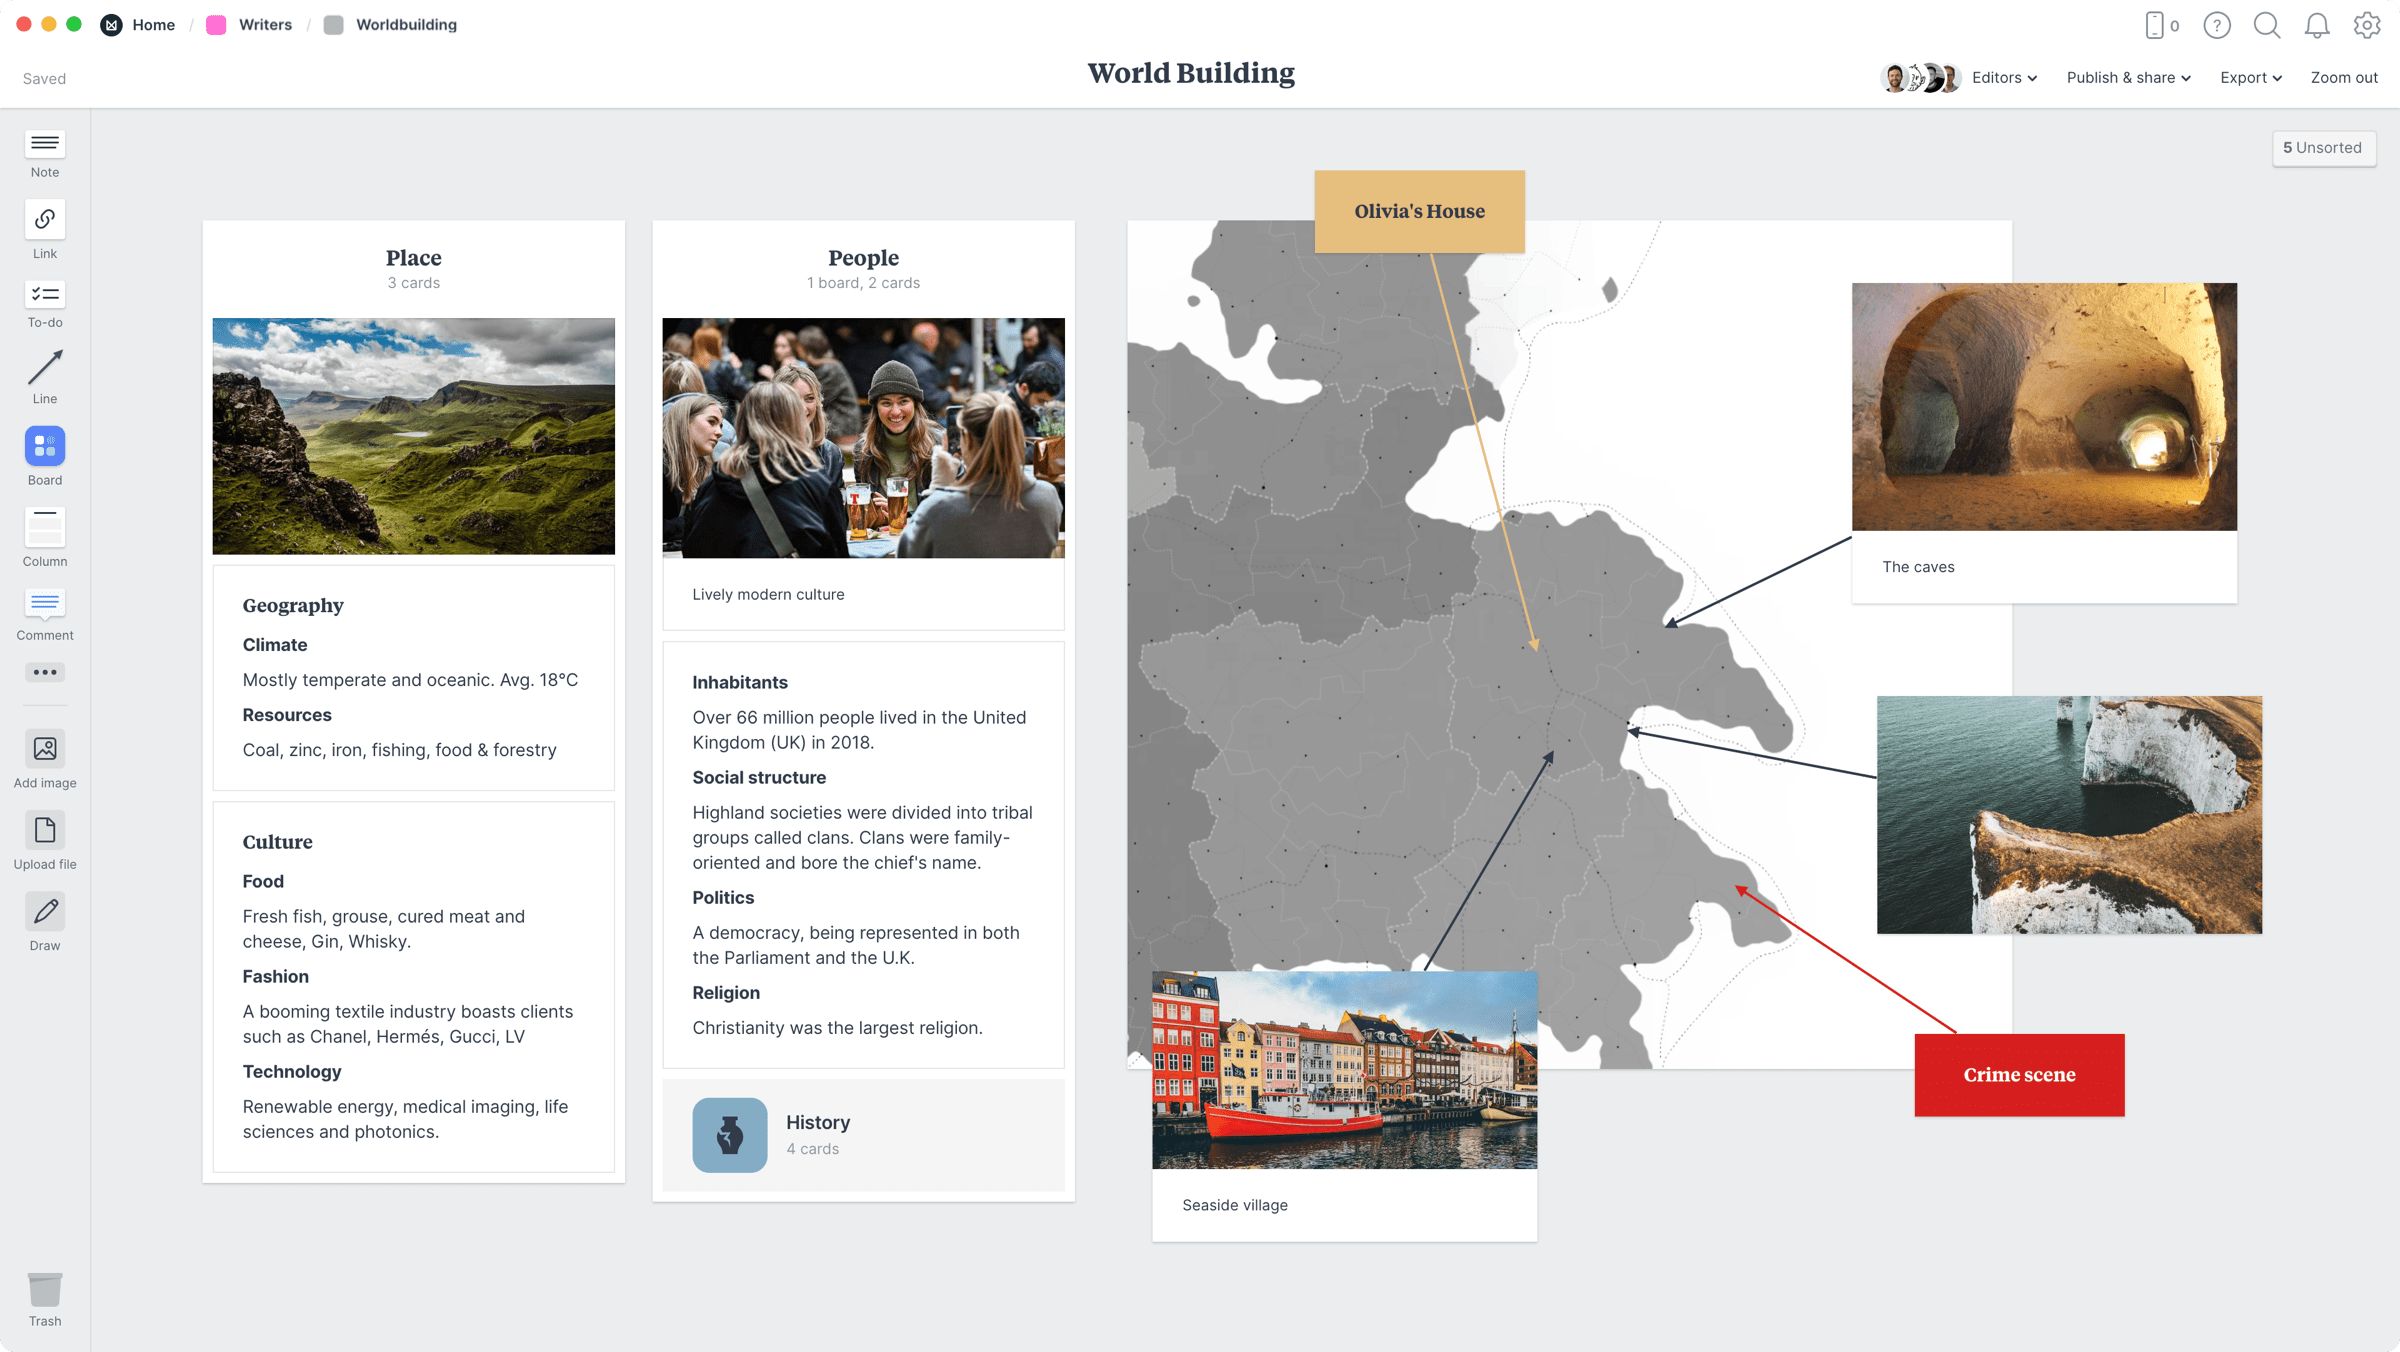 World Building Template, within the Milanote app